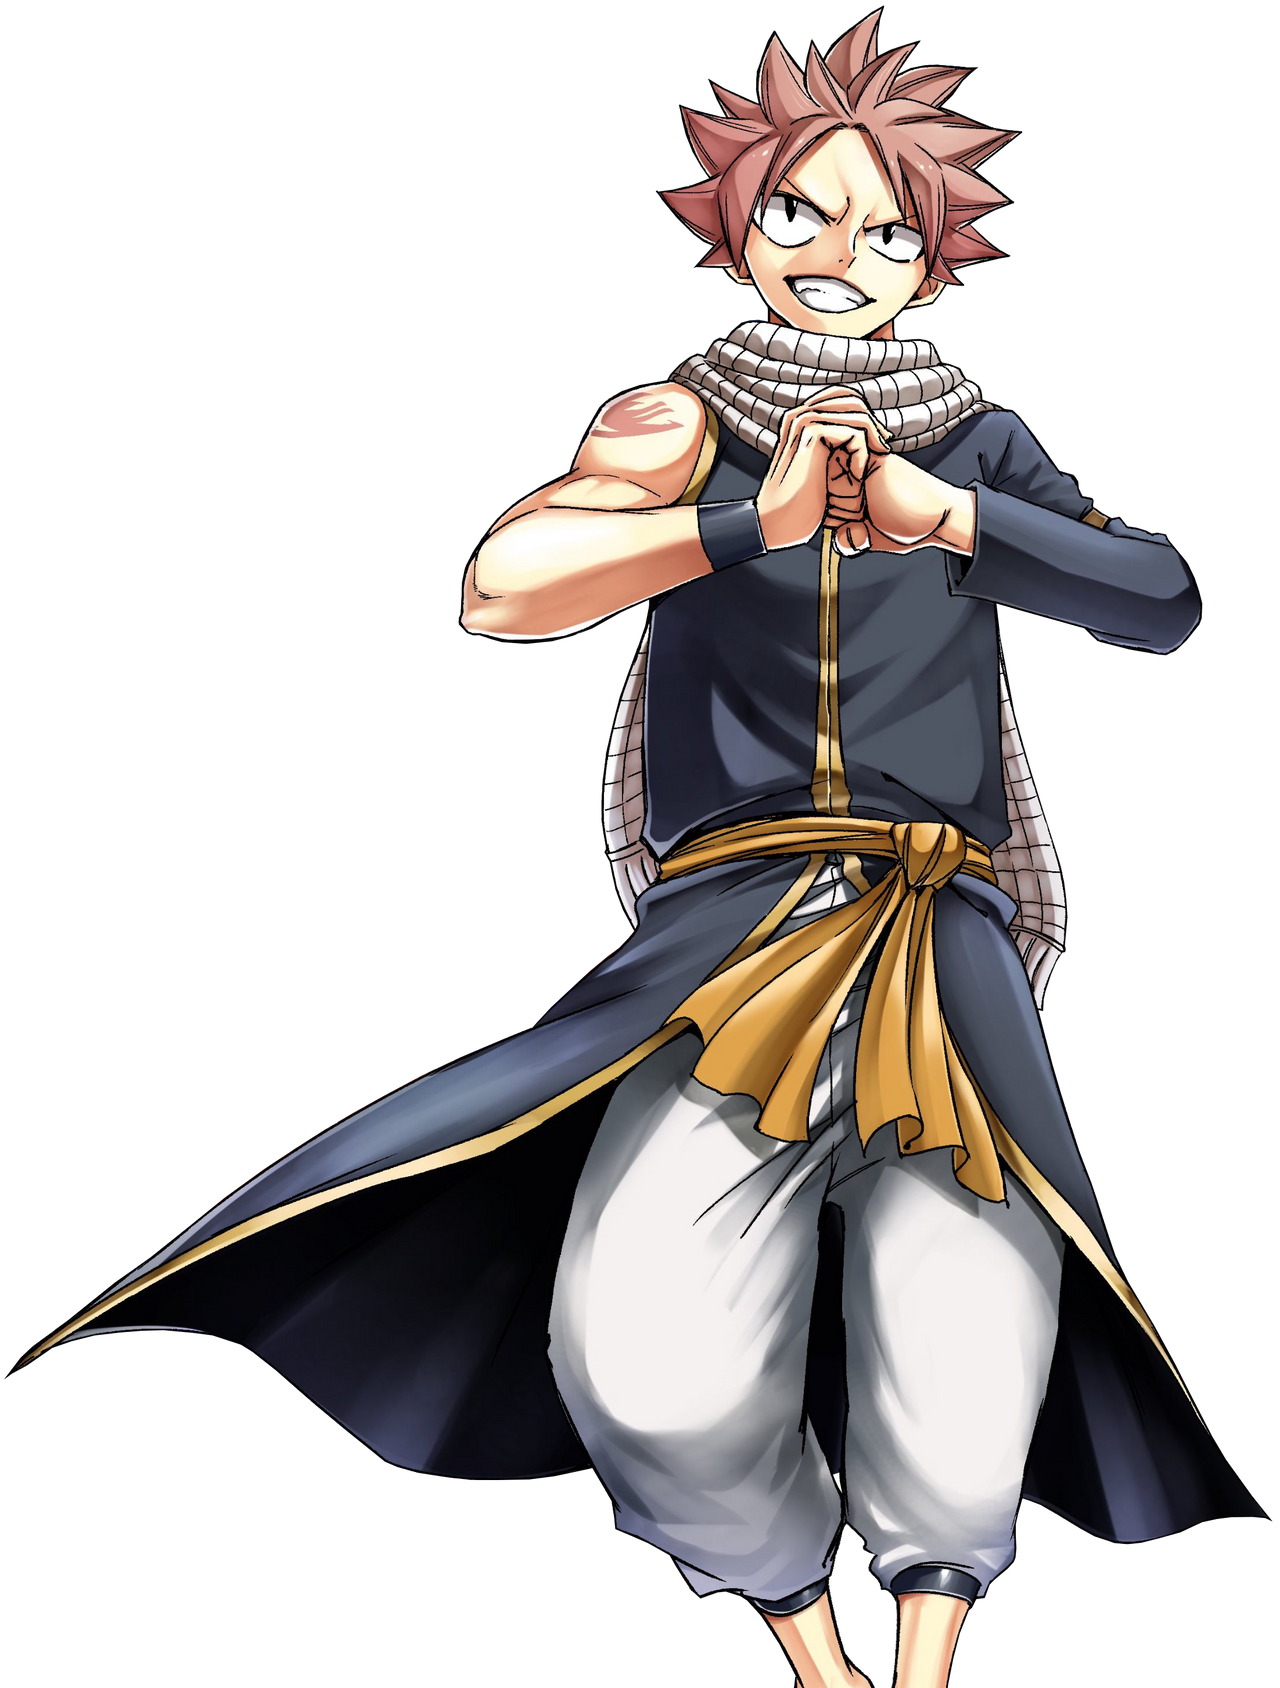 Natsu Dragneel on Twitter  Fairy tail pictures, Fairy tail anime